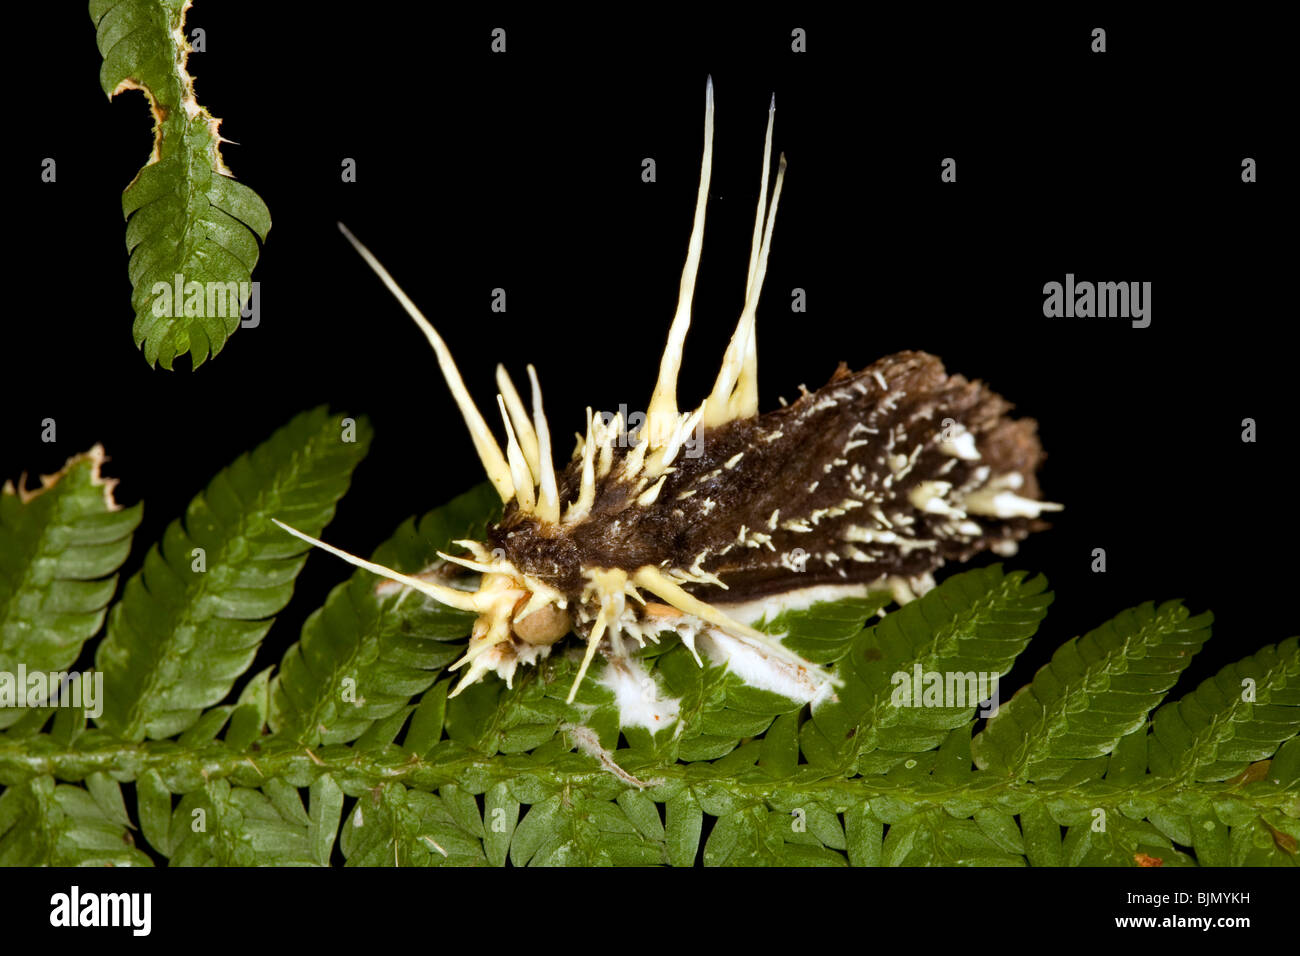 parasitic fungus Cordiceps sp. attacking a moth Stock Photo